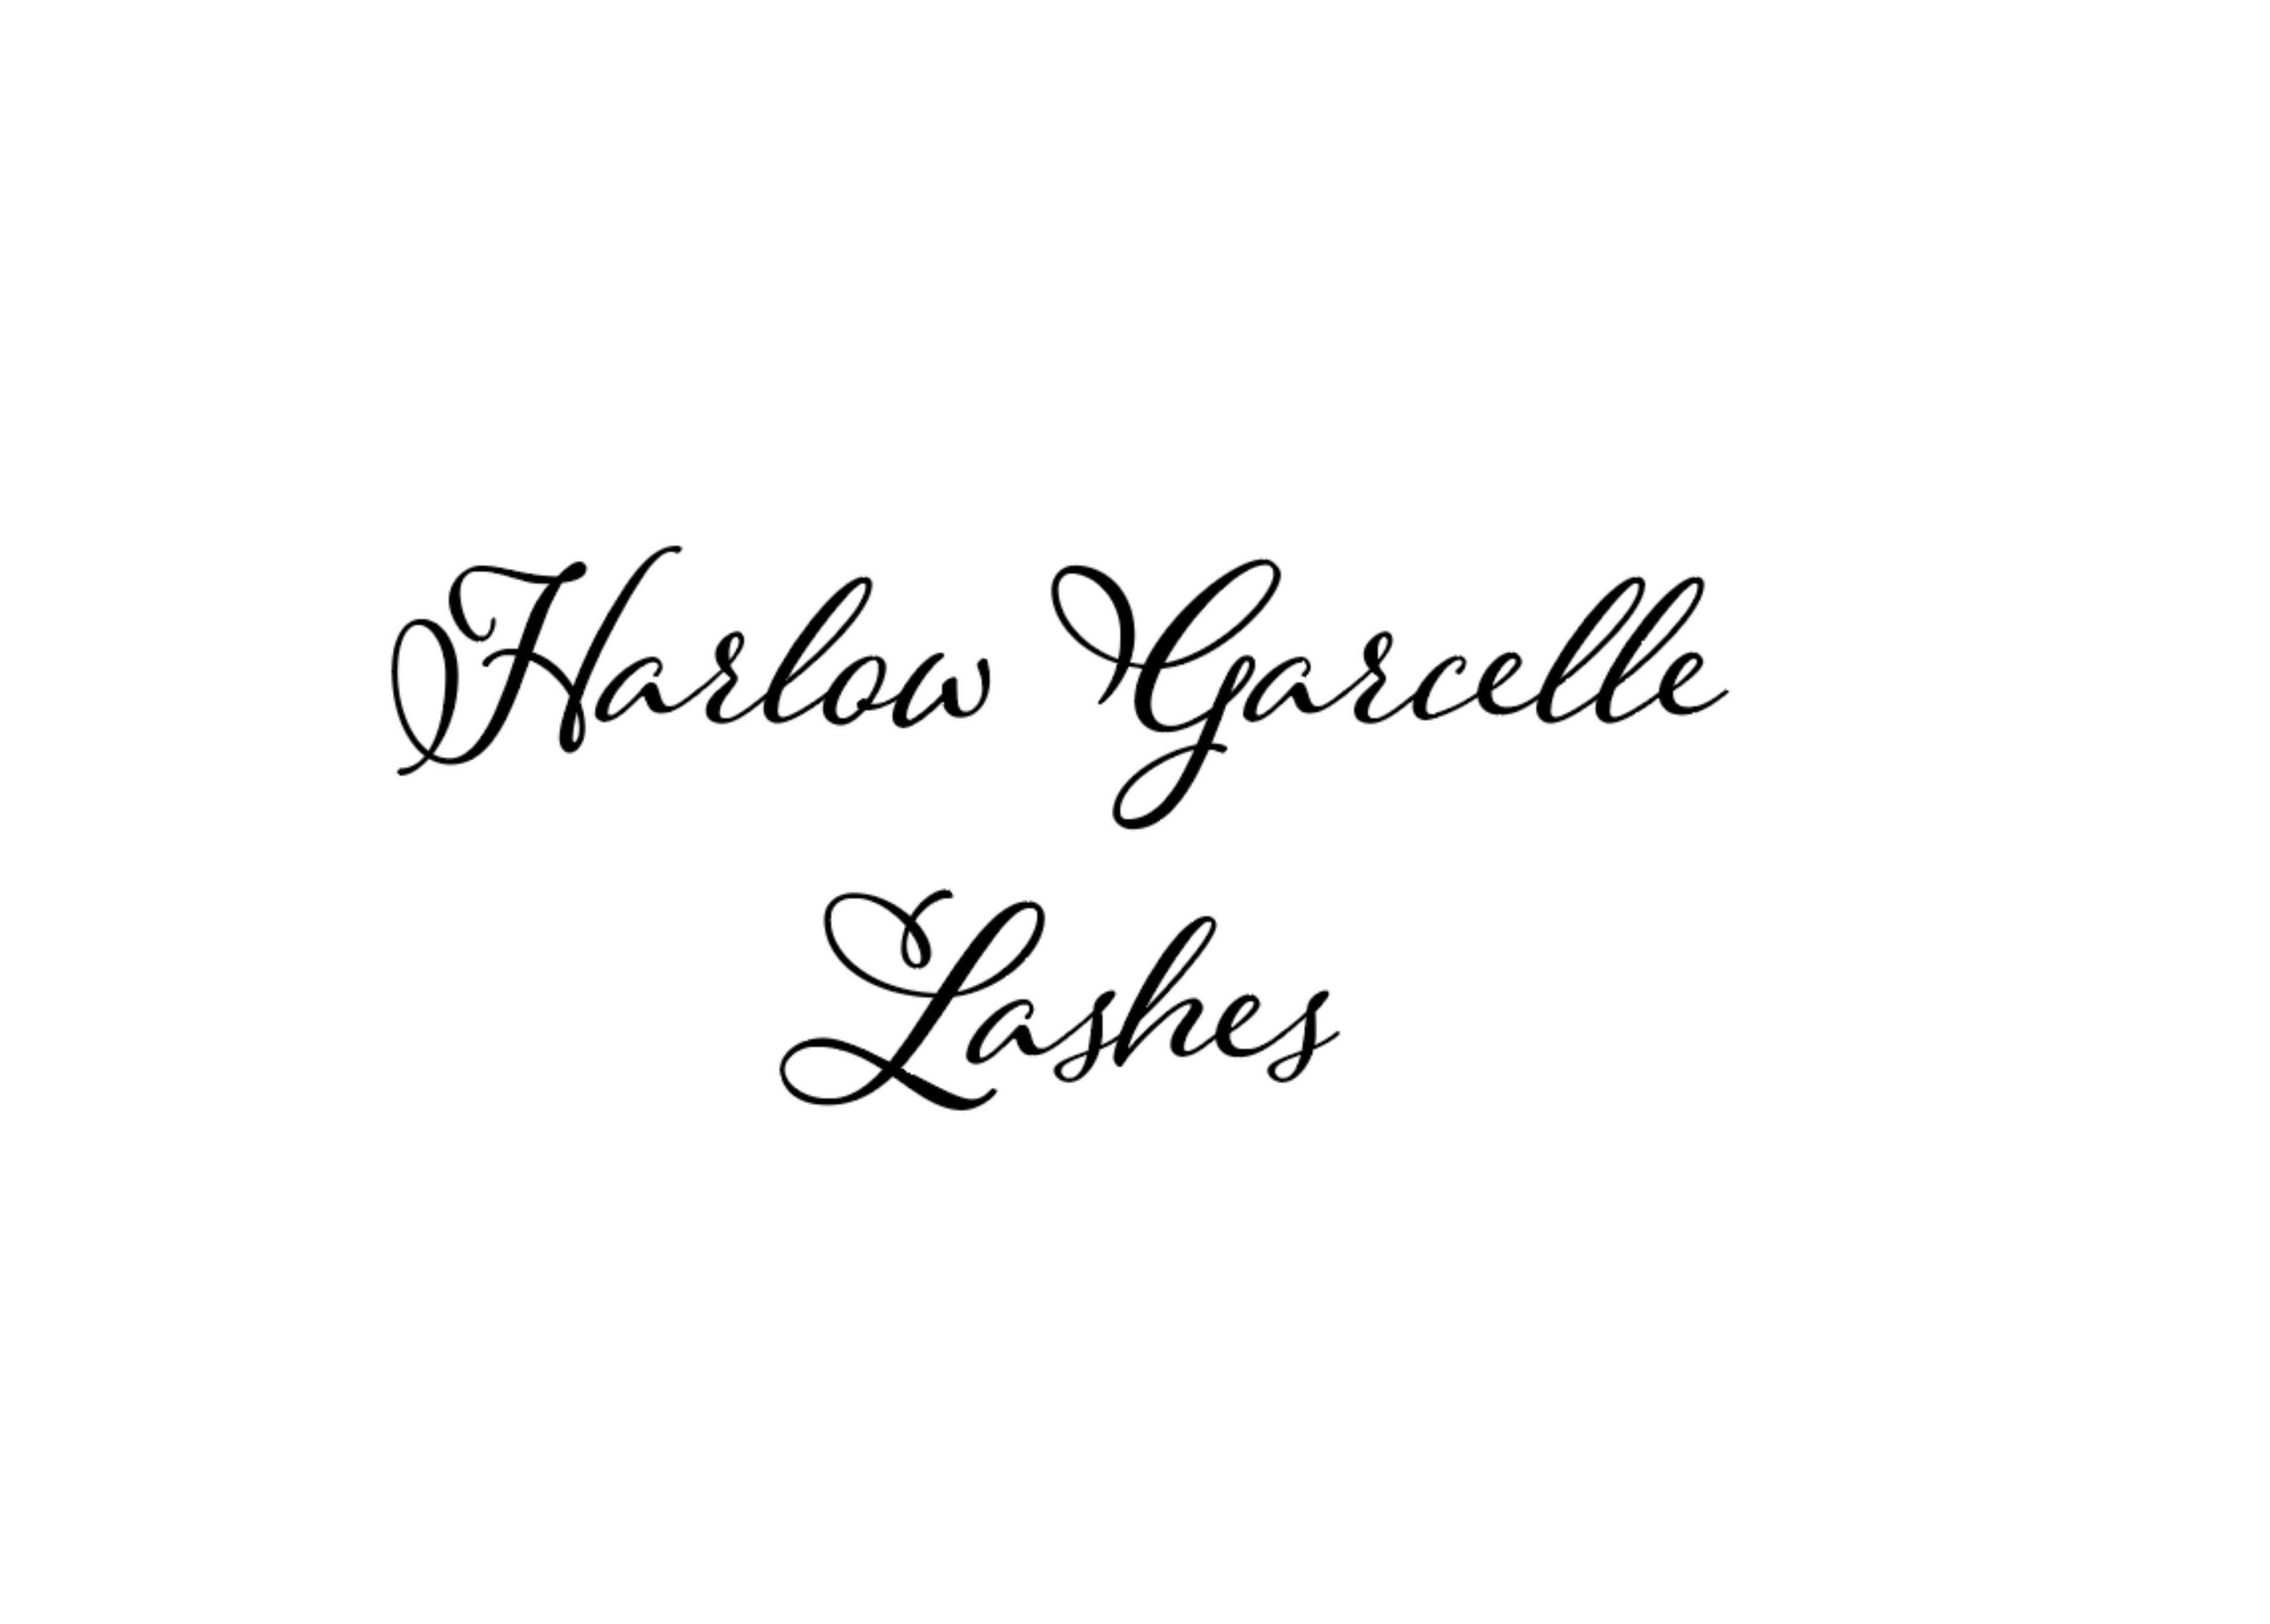  HARLOW GARCELLE LASHES